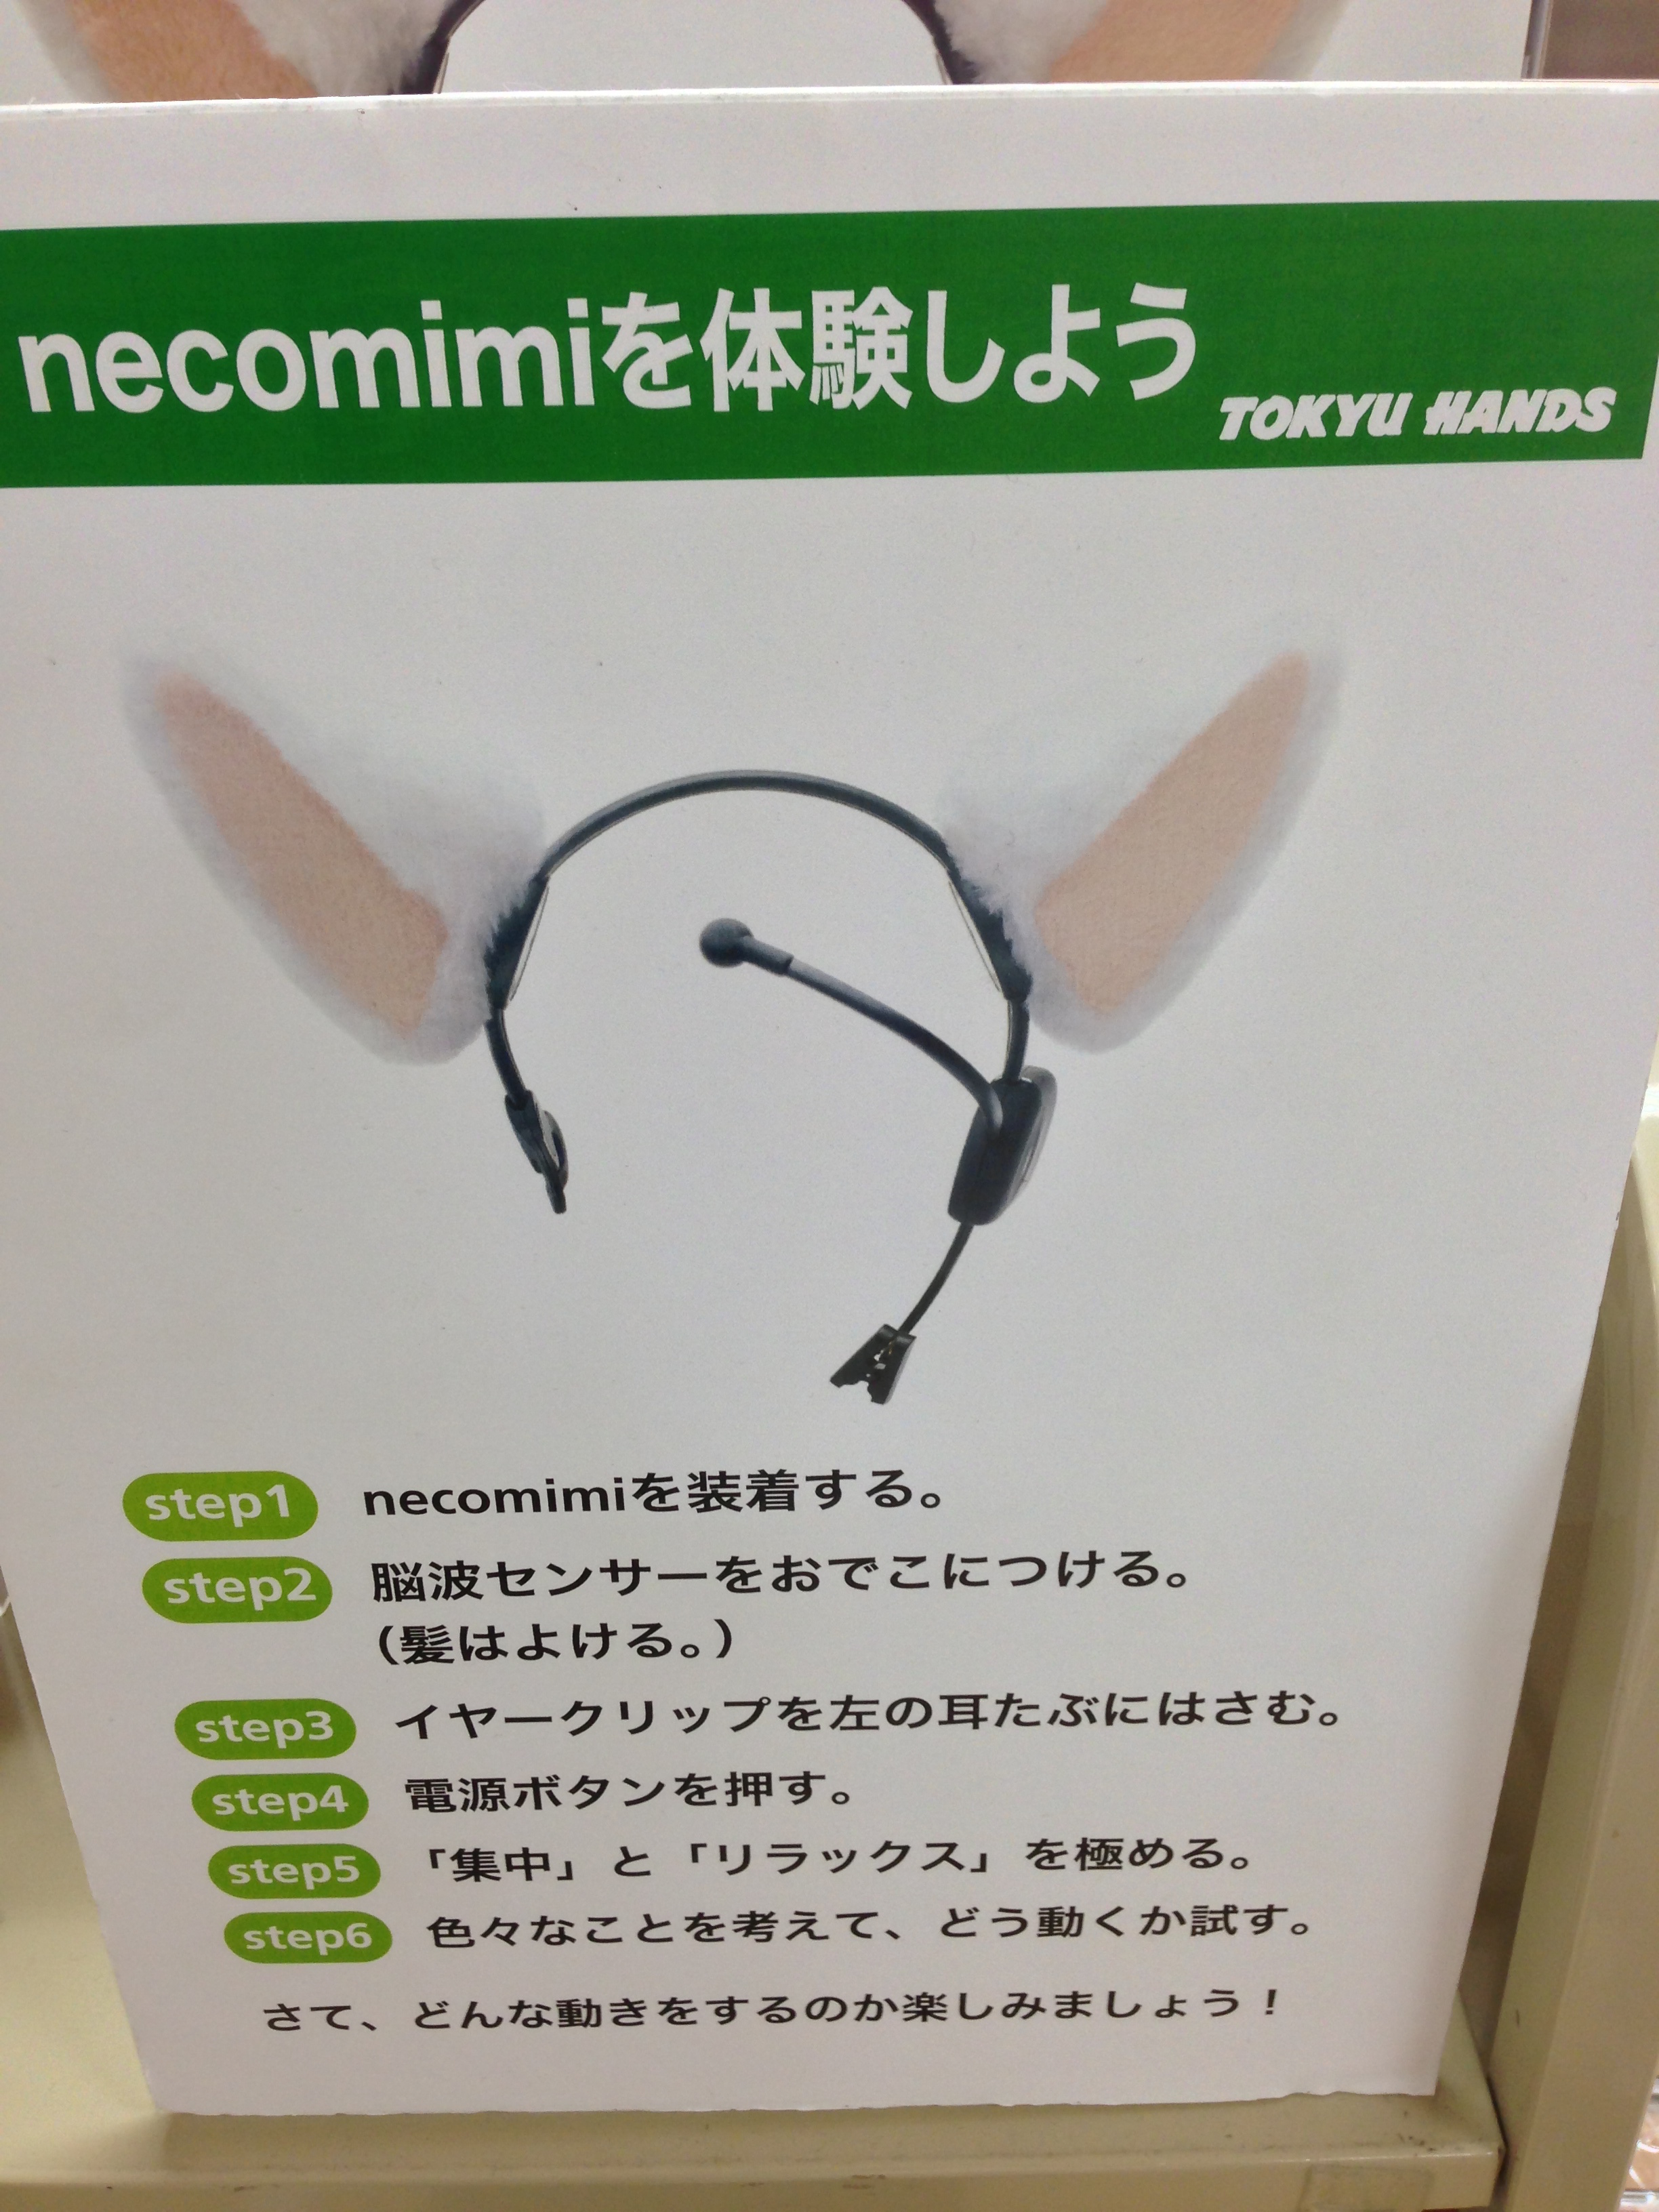 The word 'necomini' makes me think of cat ears, but I don't think that's what these are.